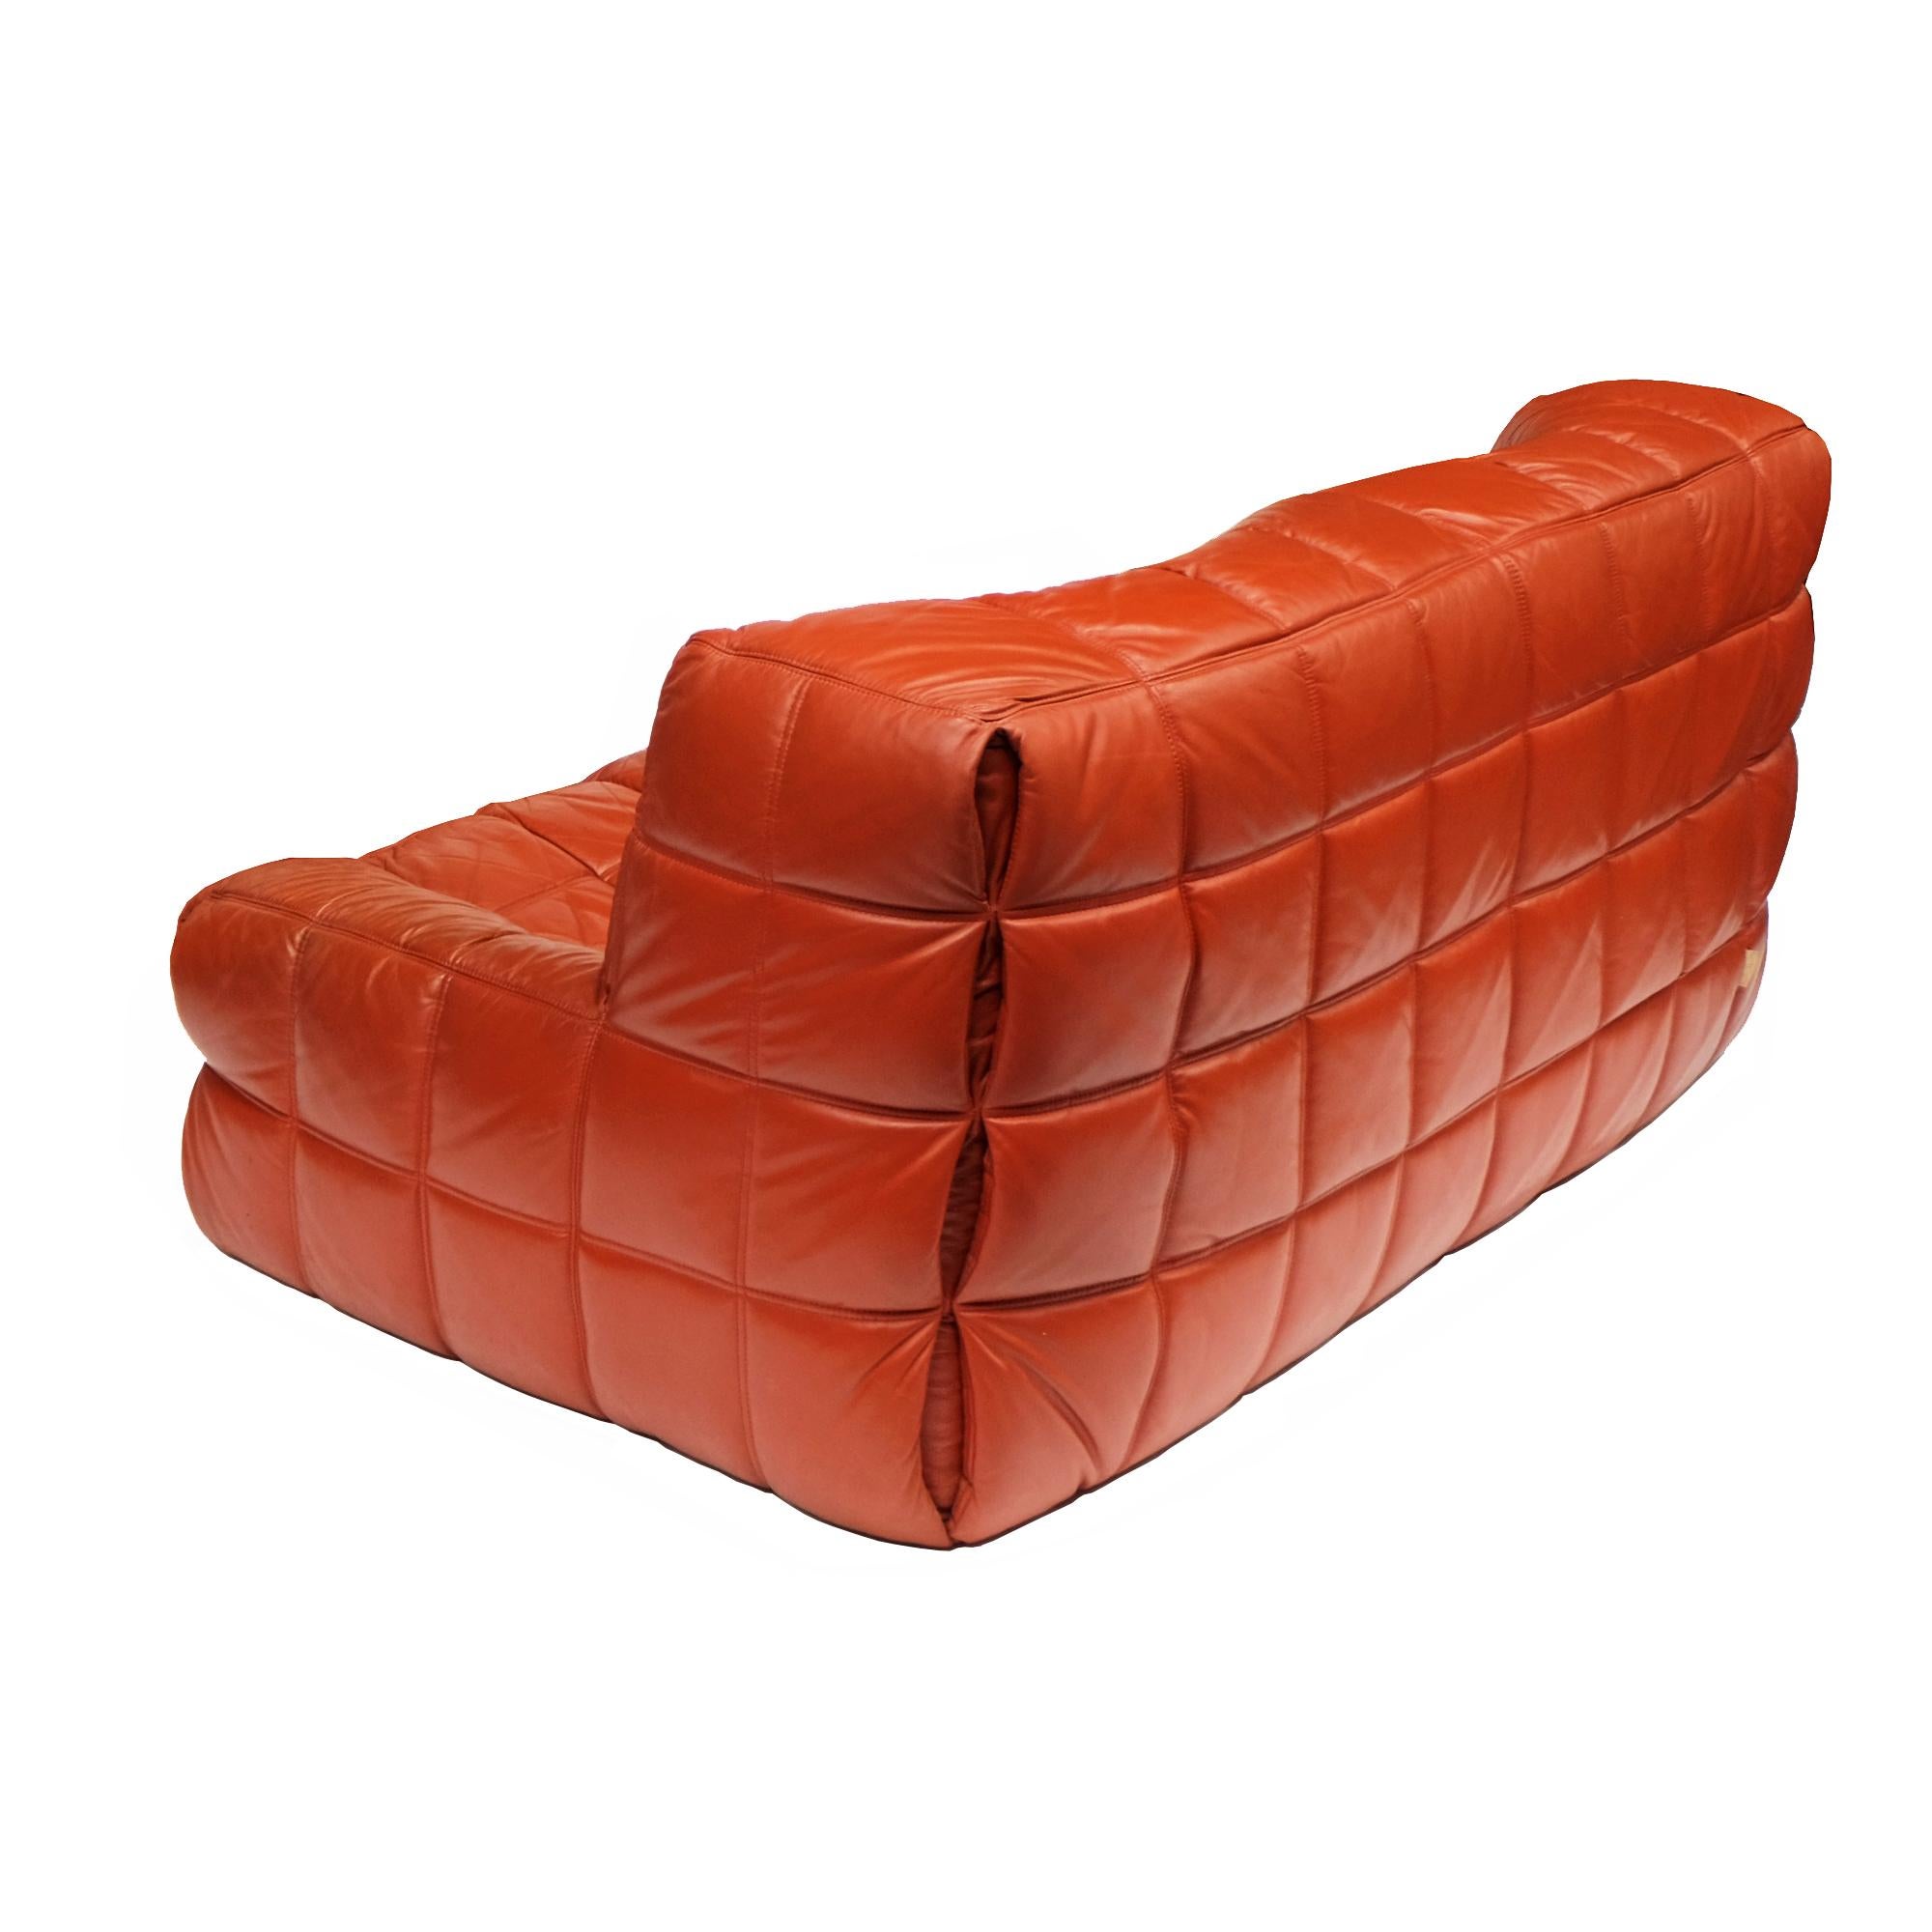 Two-seat sofa designed by Michel Ducaroy for Ligne Roset, 1976.

Foam seating elements upholstered in stitched leather.

Ligne Roset labels.

Measures: Sofa H 75cm x W 160cm x D 100cm.
 